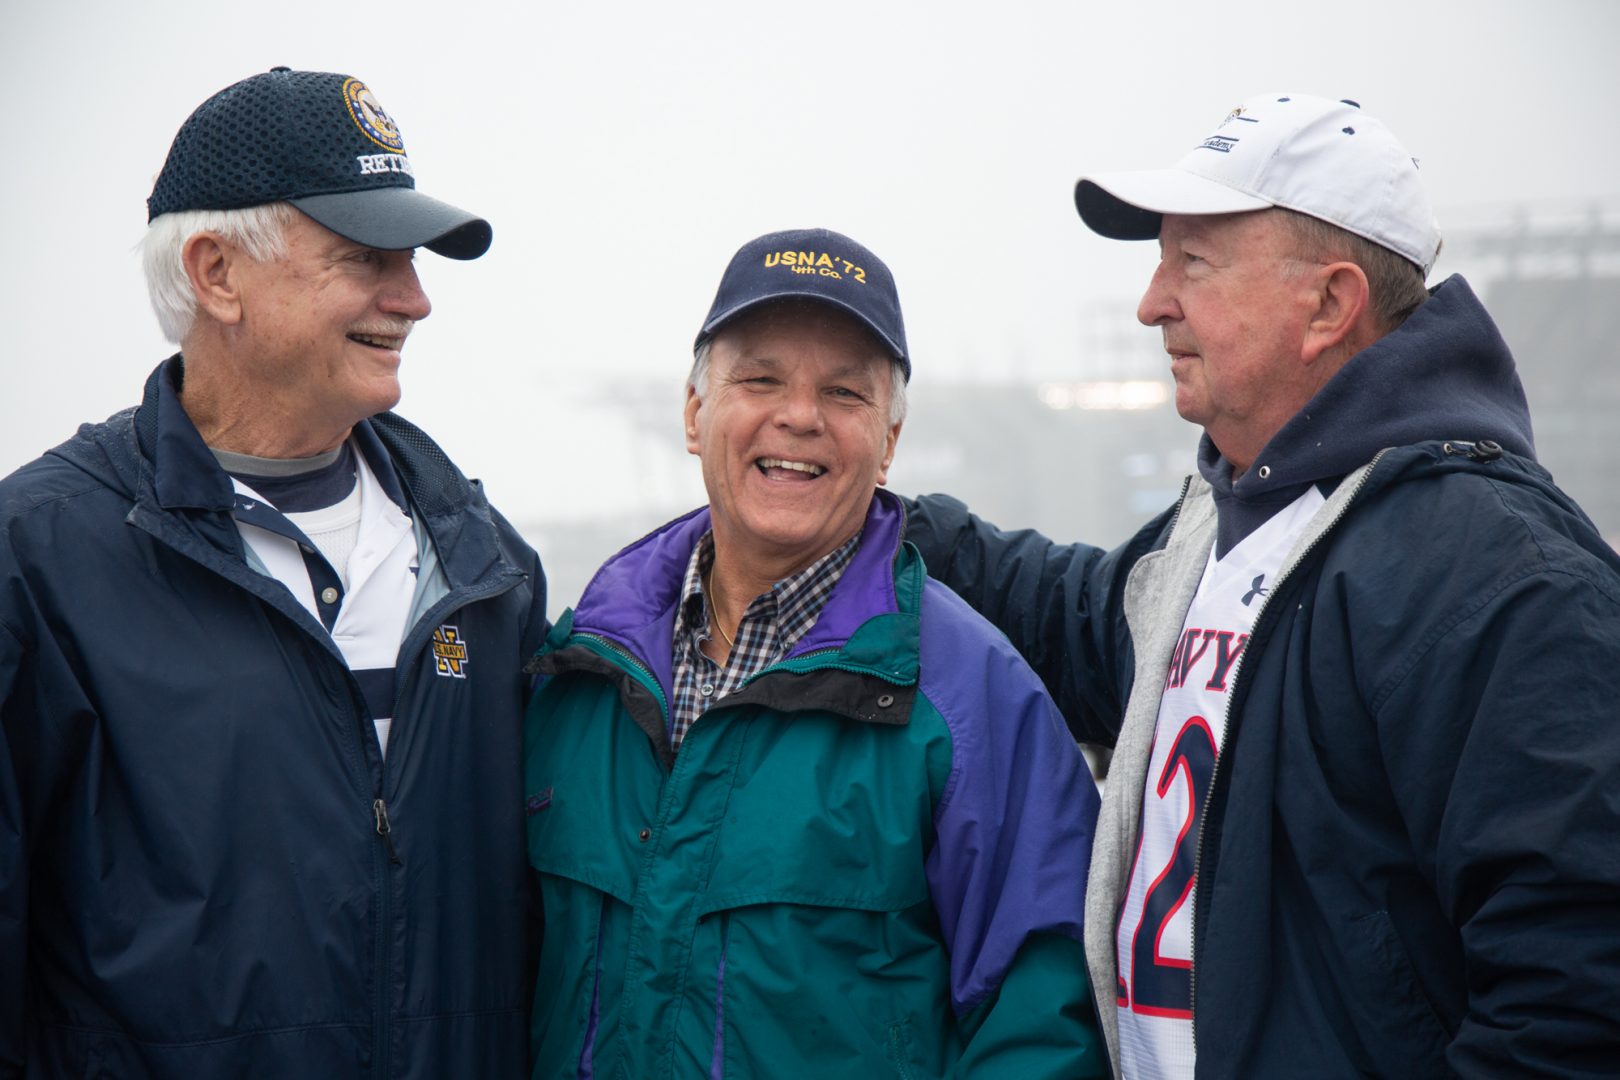 Don Carlson, Jerry Stahl, and Mike Brennan (left to right) graduated from the Naval academy in 1972. They've been coming to the annual Army-Navy game together since they were cadets. Today they traveled from Maryland, South Carolina, and Washington DC to watch the game together in Philadelphia, Pa on December 14th 2019.